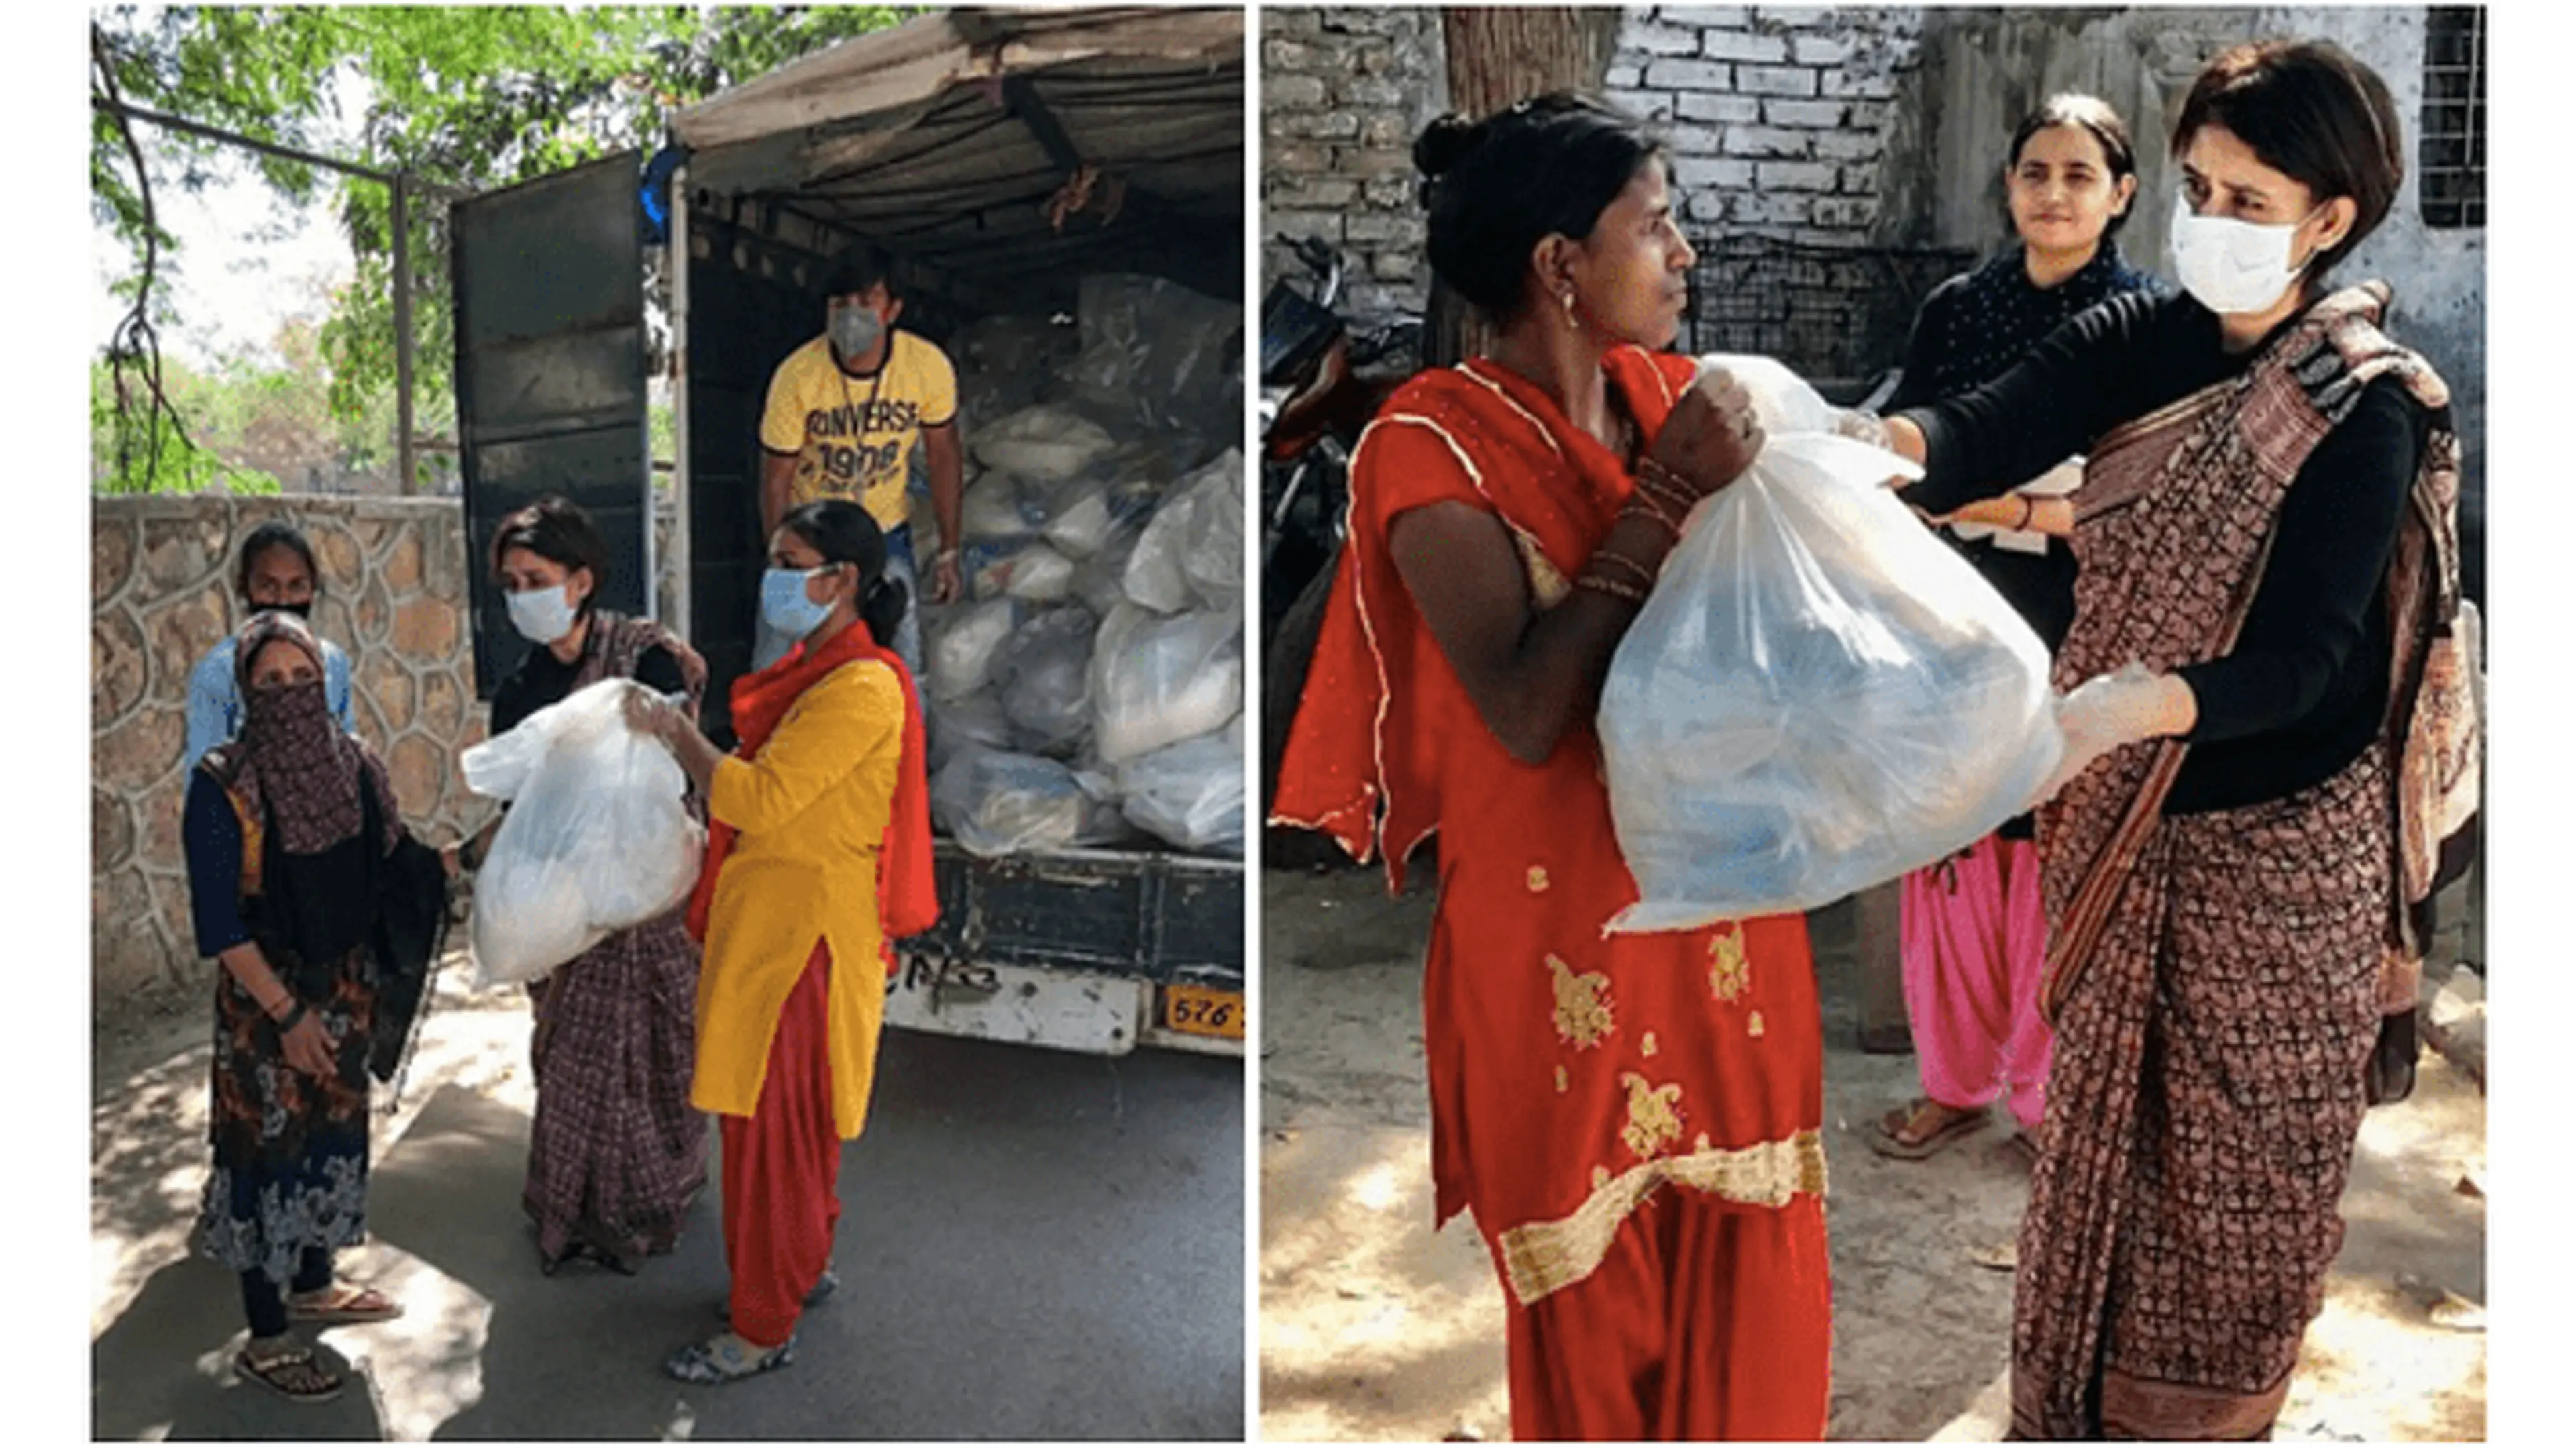 This Delhi-based NGO is providing food to 450 families in times of coronavirus lockdown 

